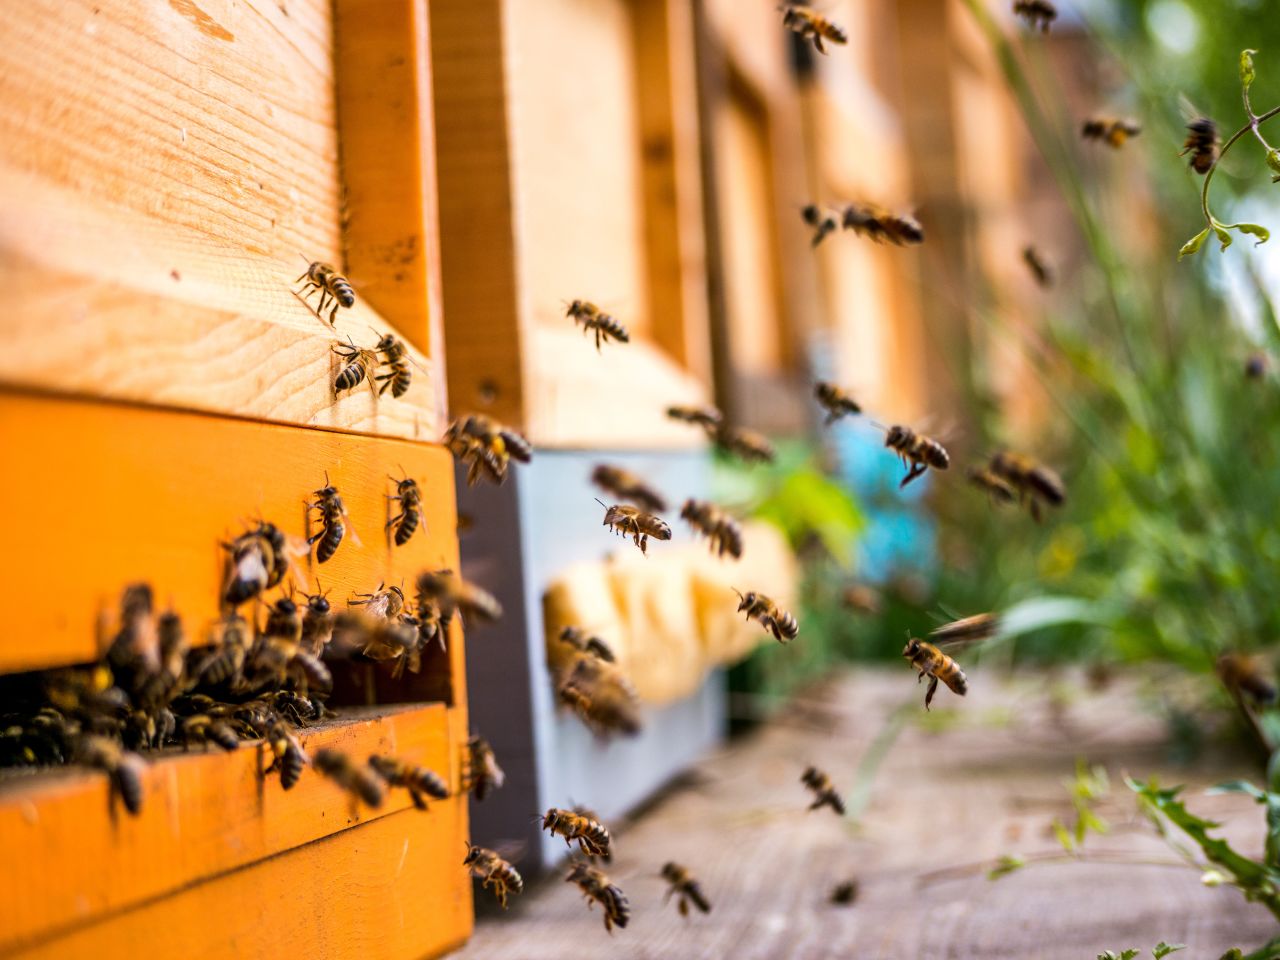 Bees are experiencing what Ramsey calls a "pollinator pandemic," and have been experiencing high loss since 1987, when Varroa mites were first discovered in North America.